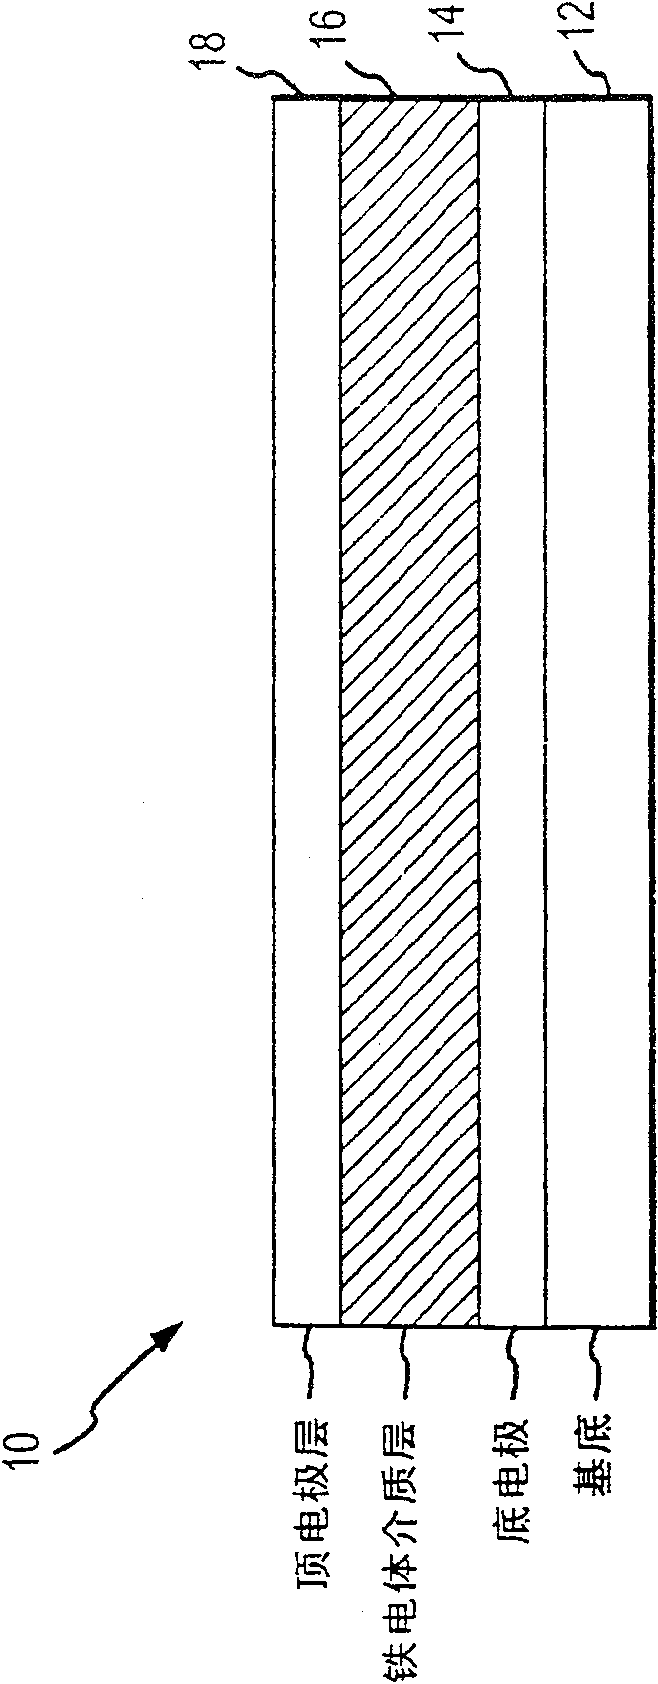 Method for producing crystal structure electrodes for oriented pzt capacitors